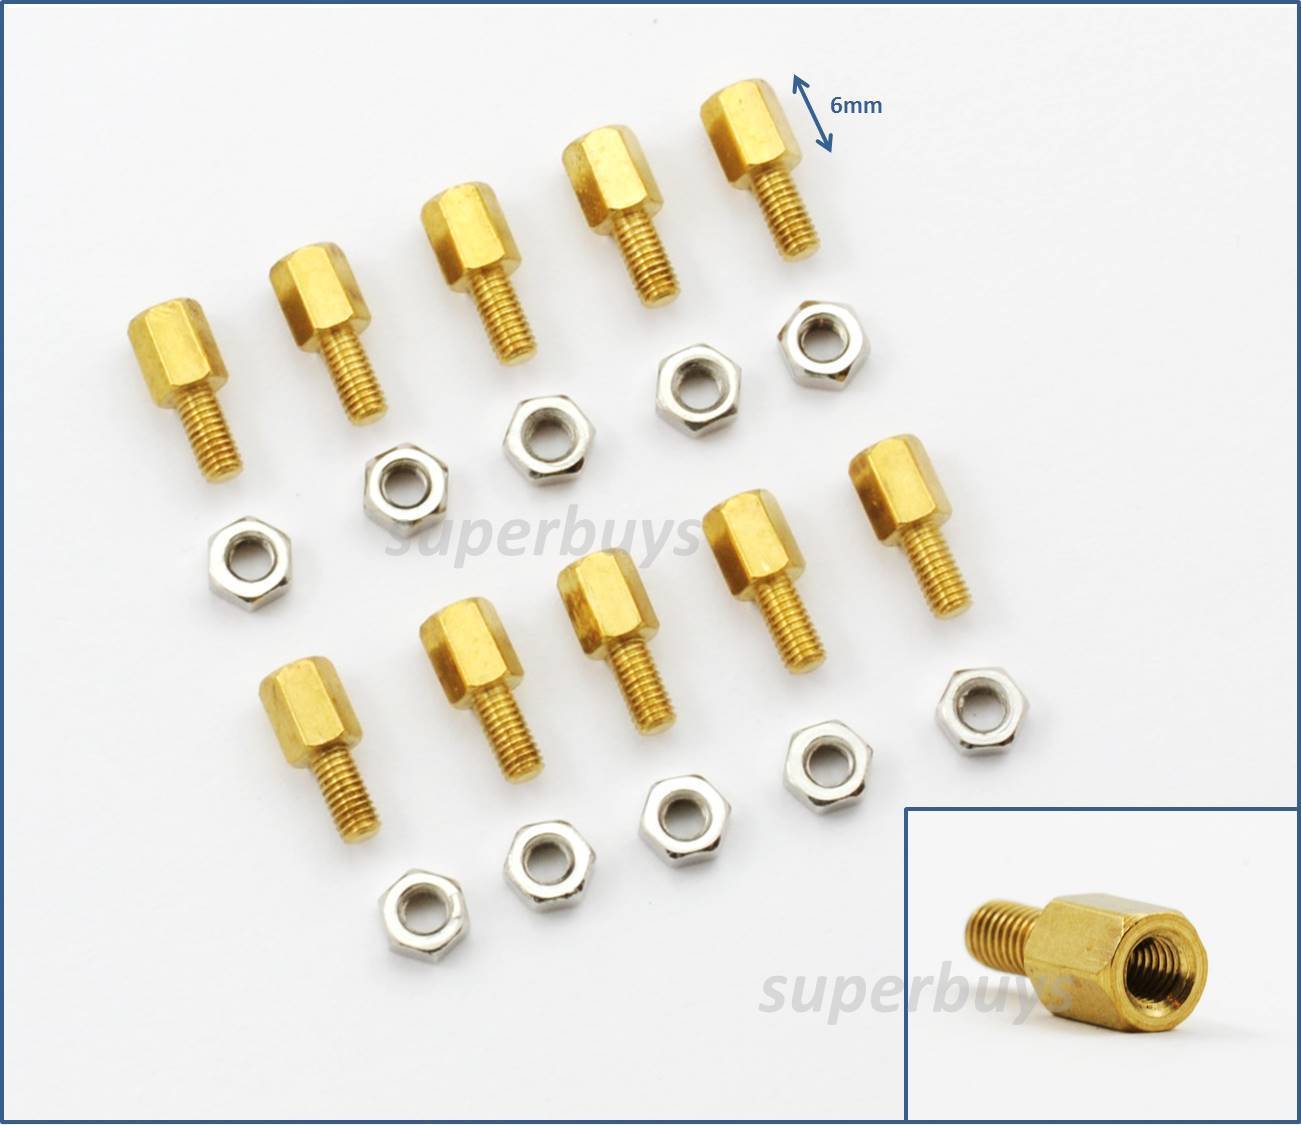 10pc 6mm M3 Male Female Brass Standoff Spacer Separator Stand Off PCB Screw Nut